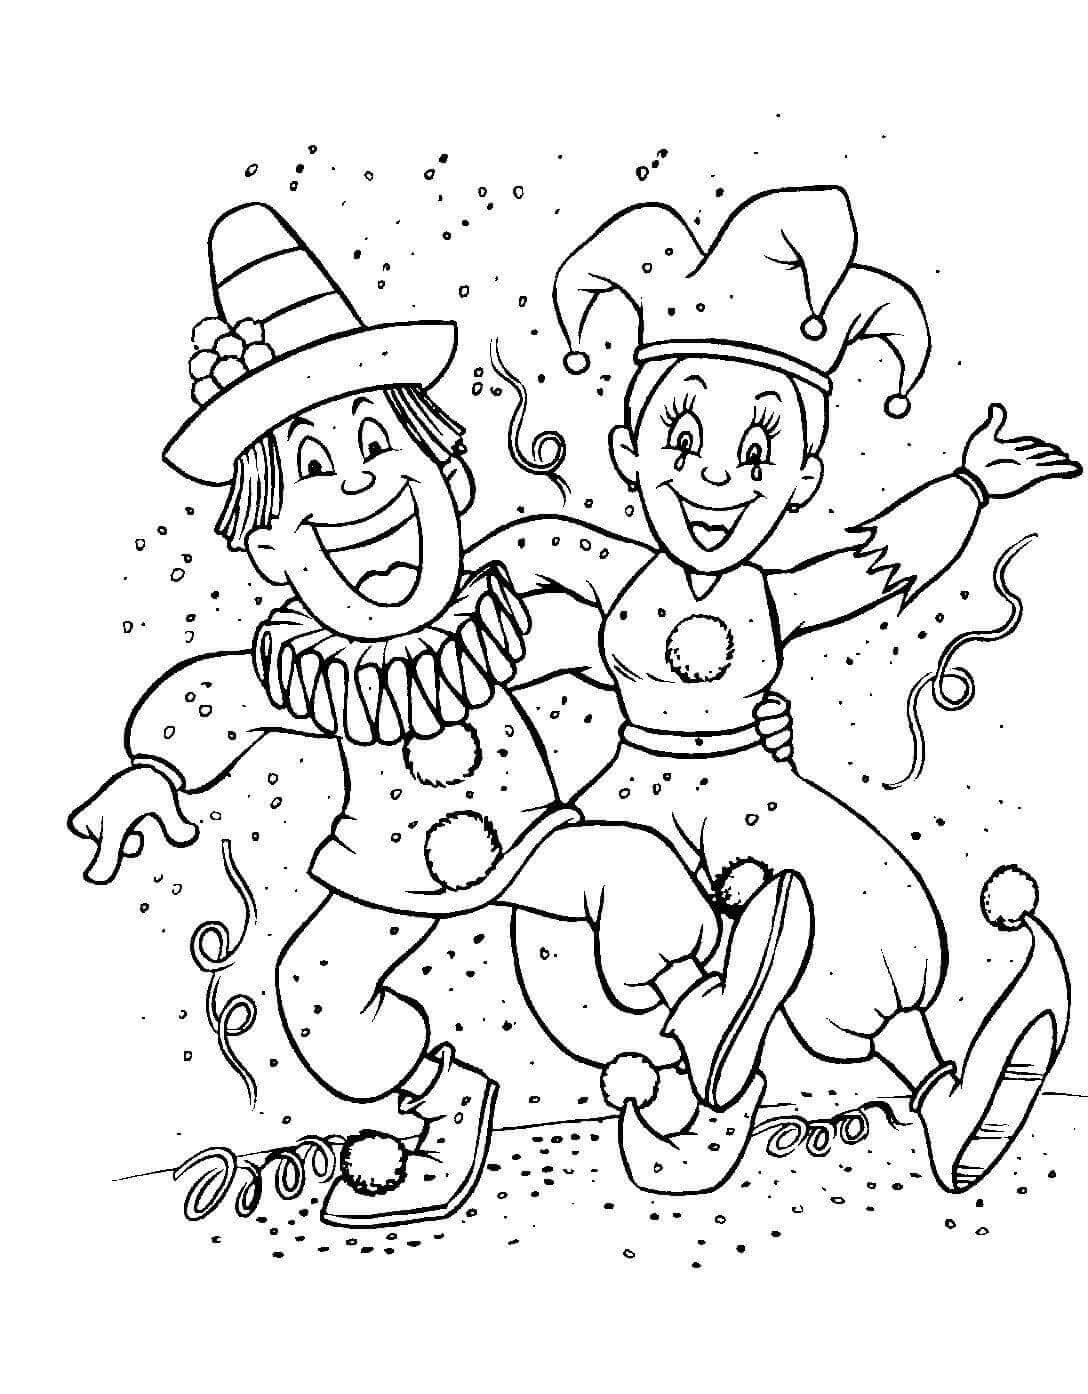 Free Mardi Gras Coloring Pages Printable, Mardi Gras coloring pages for kids, Mardi Gras Coloring Sheets to Download